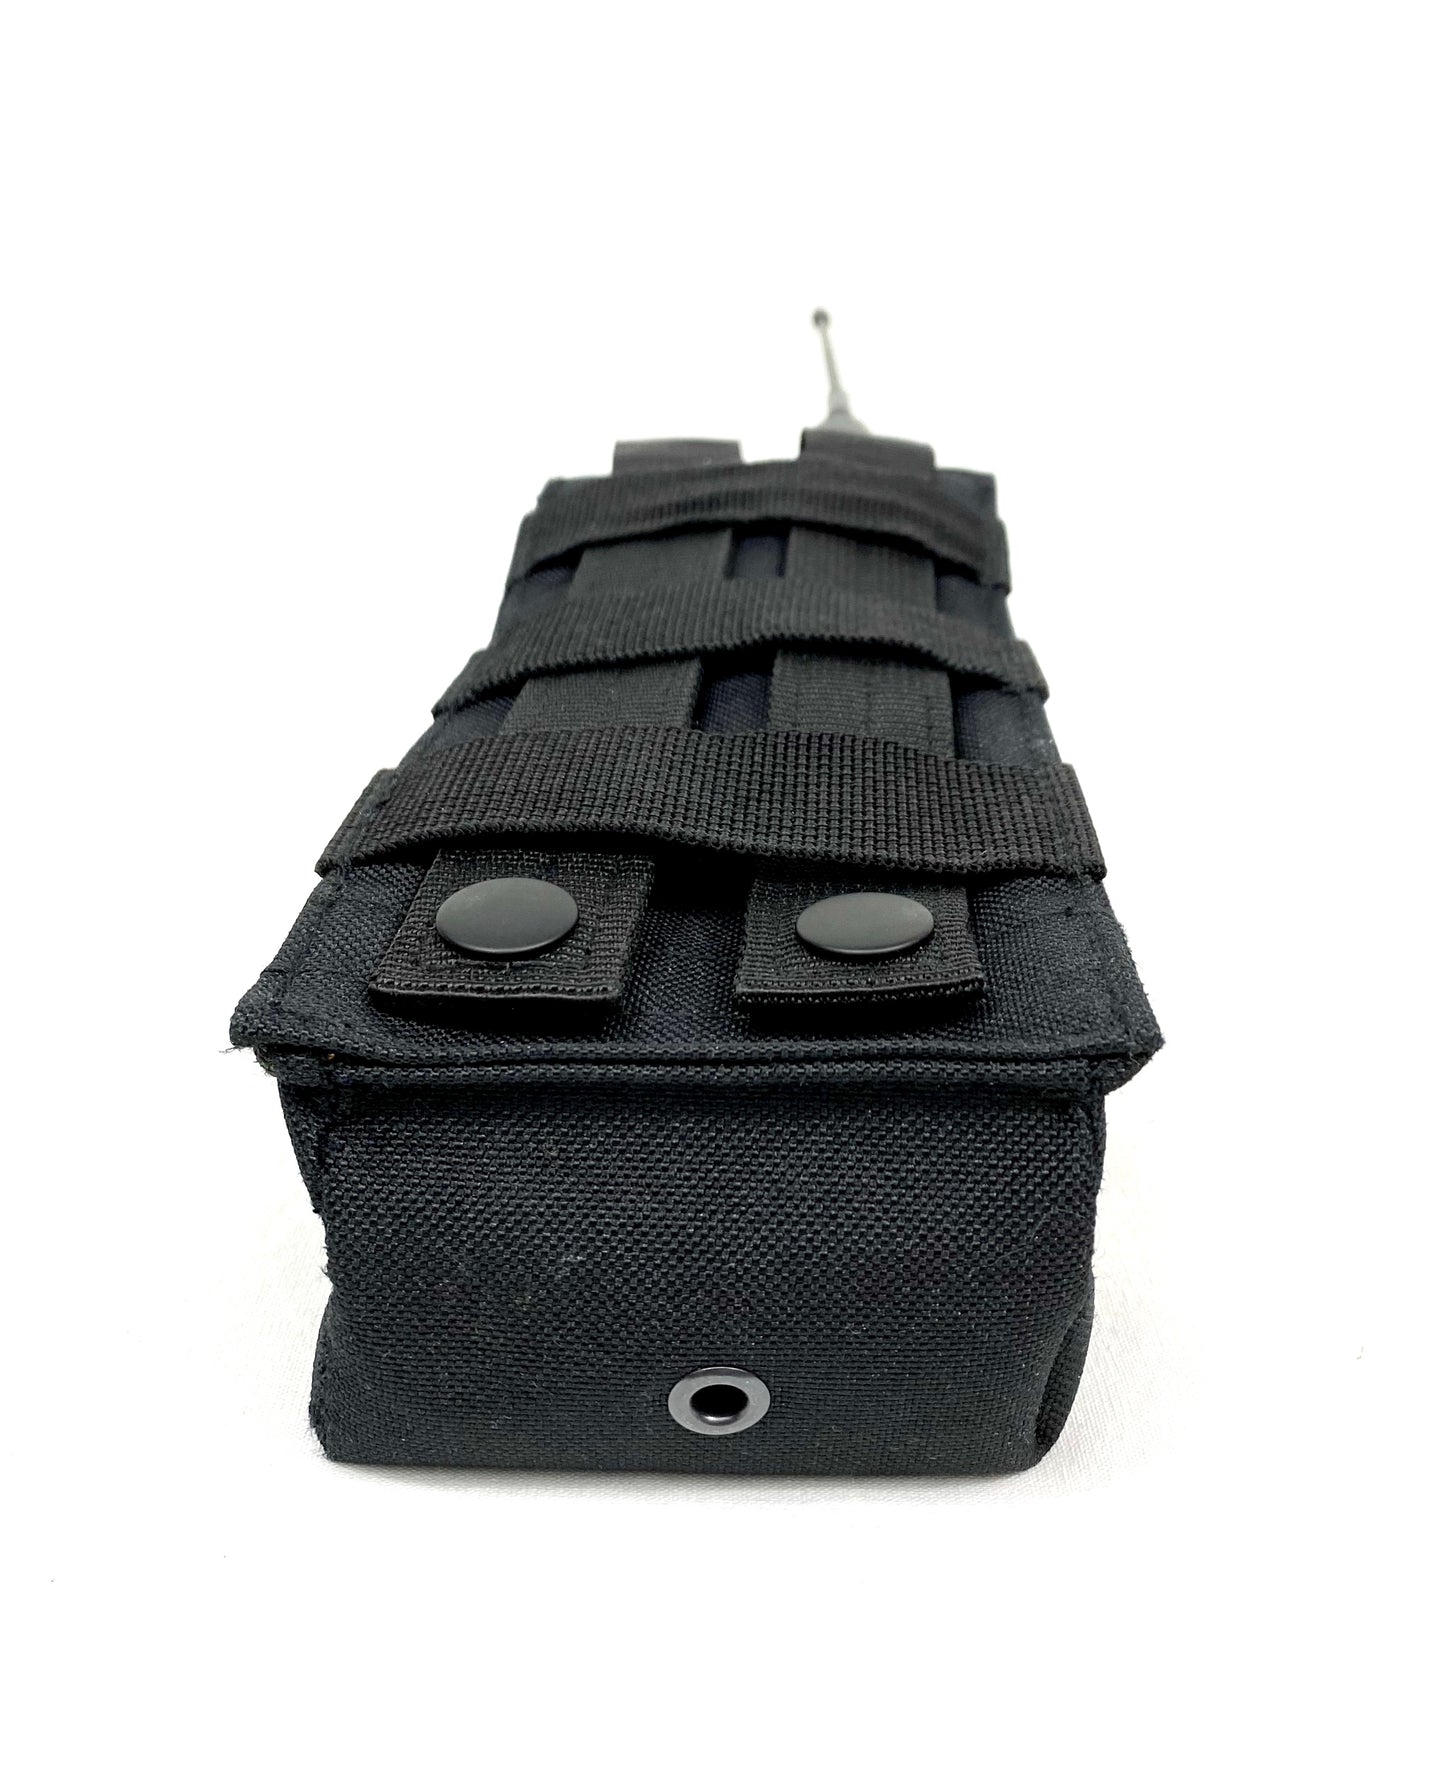 X-FIRE® Tall Washable Nylon MOLLE Pouch / Duty Belt Portable Radio Holder